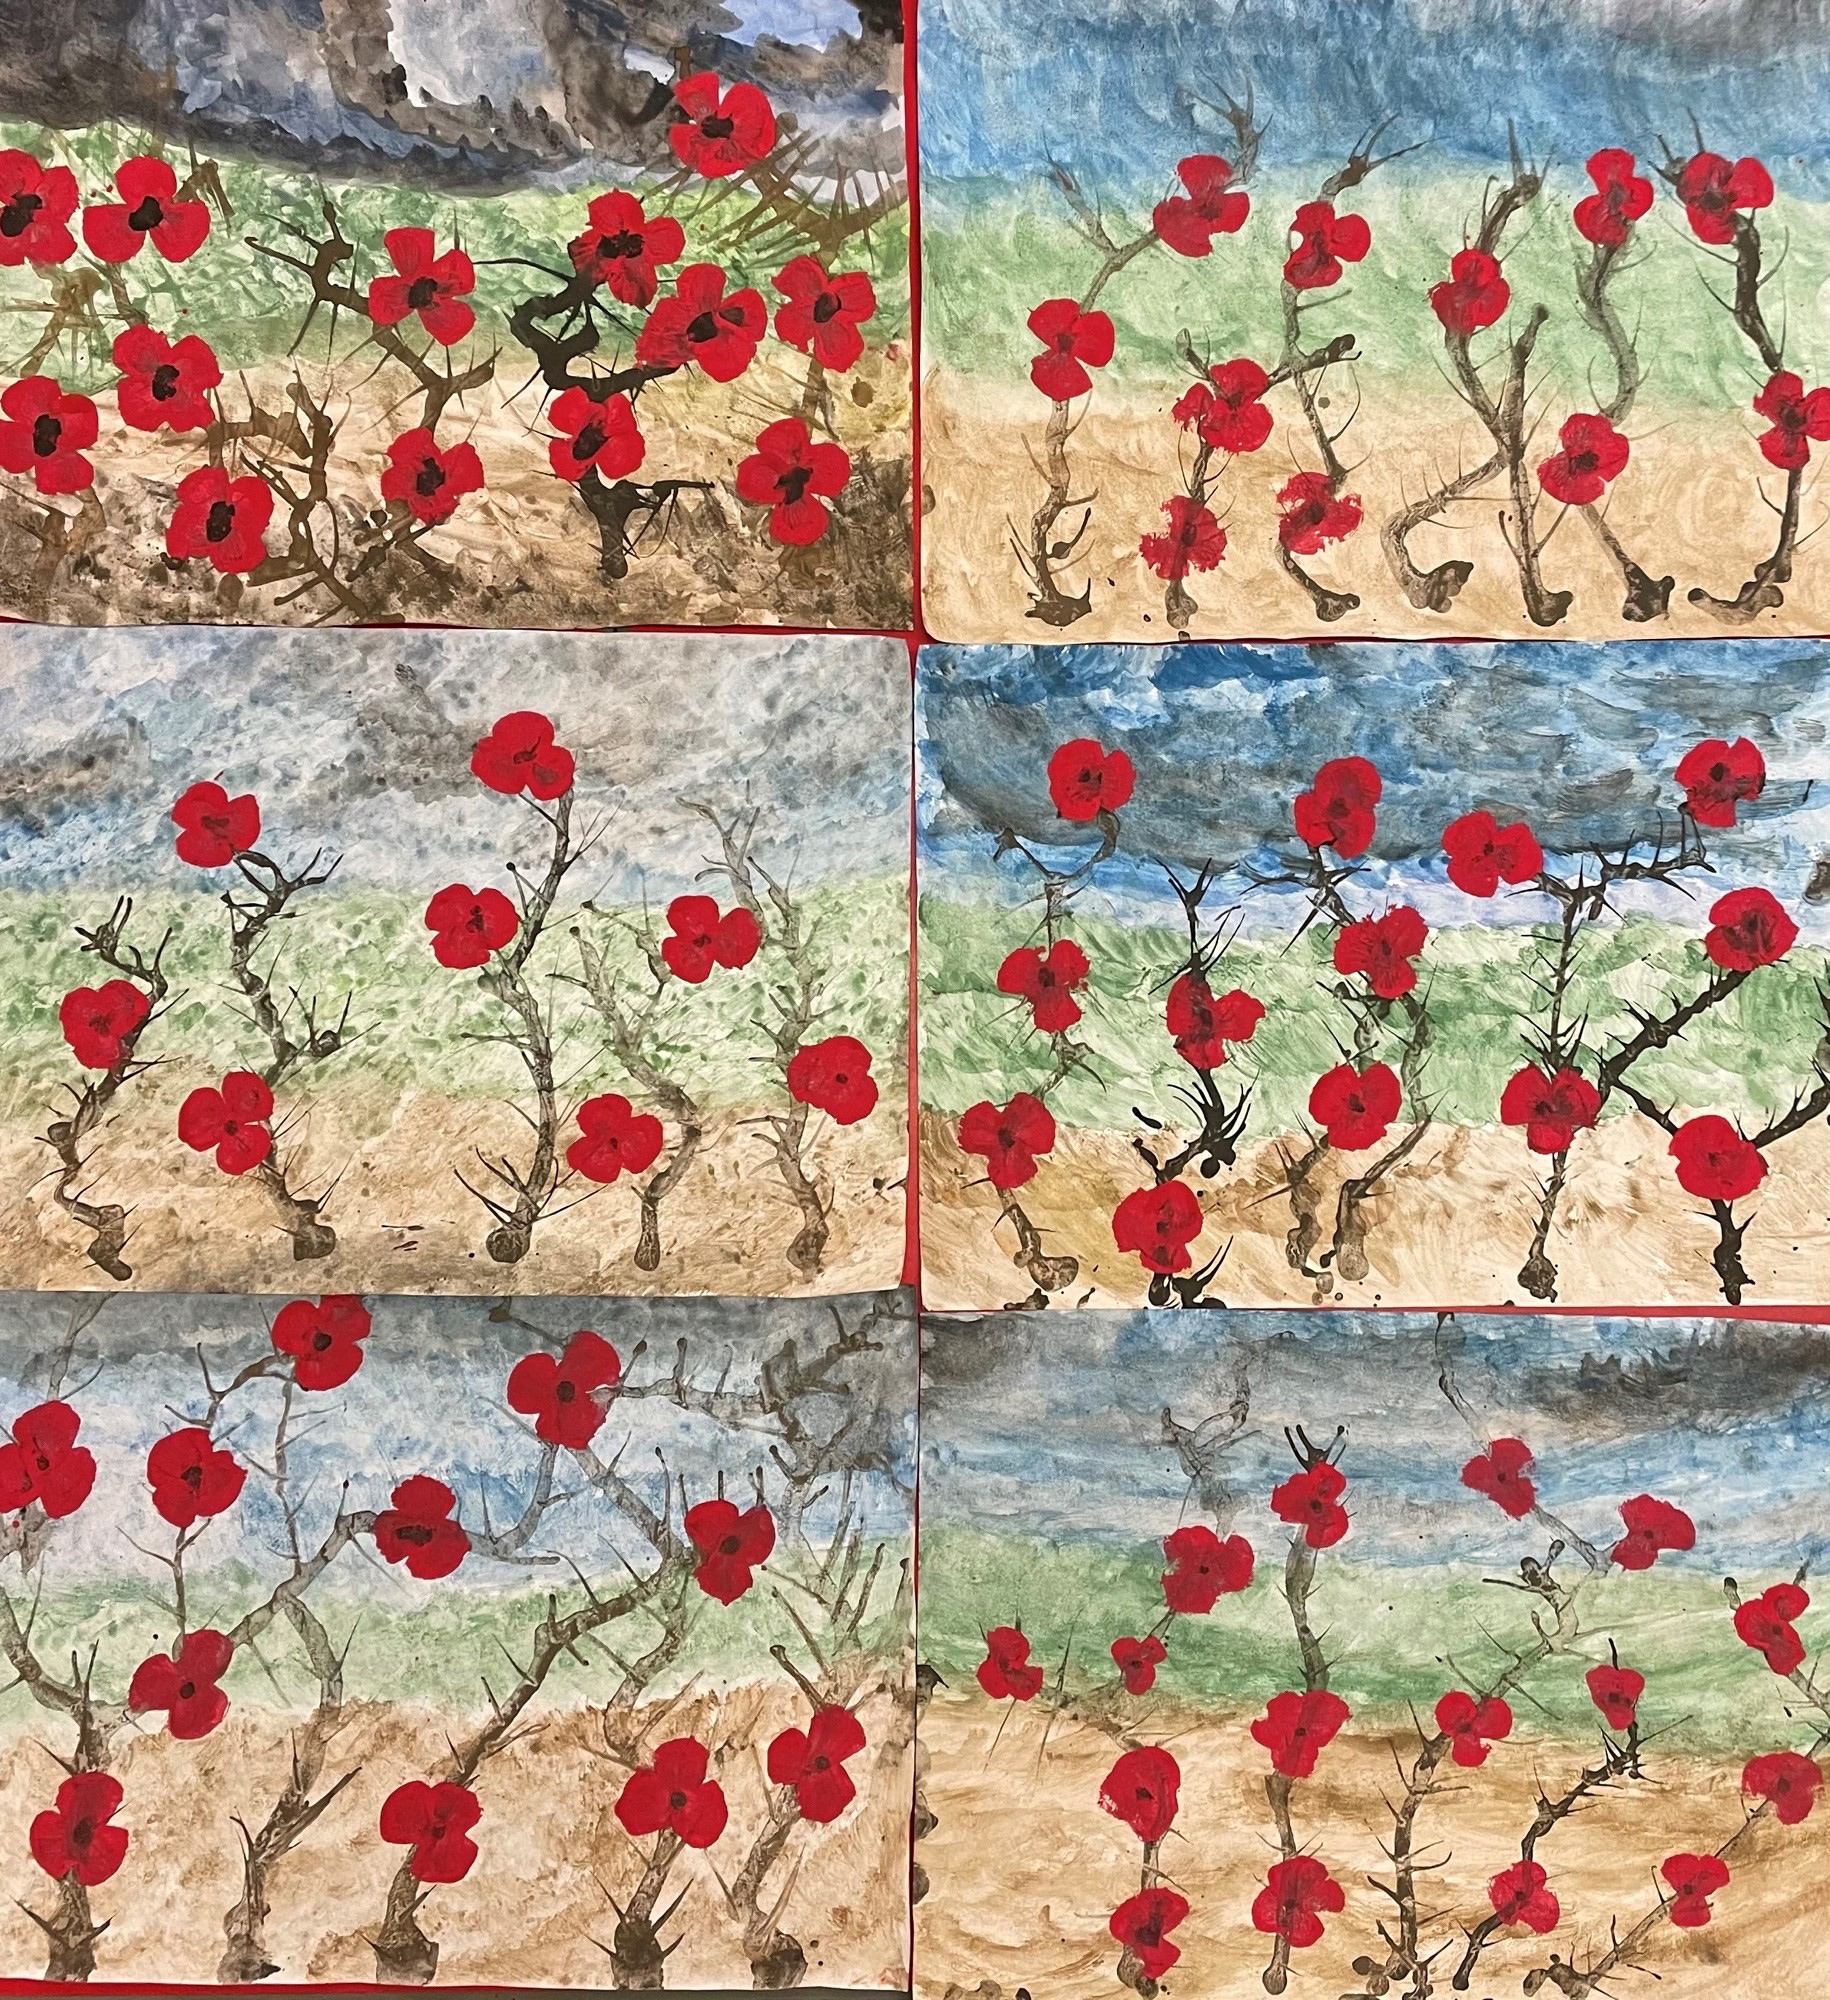 Classes at Priorsford School have been busy painting Poppies